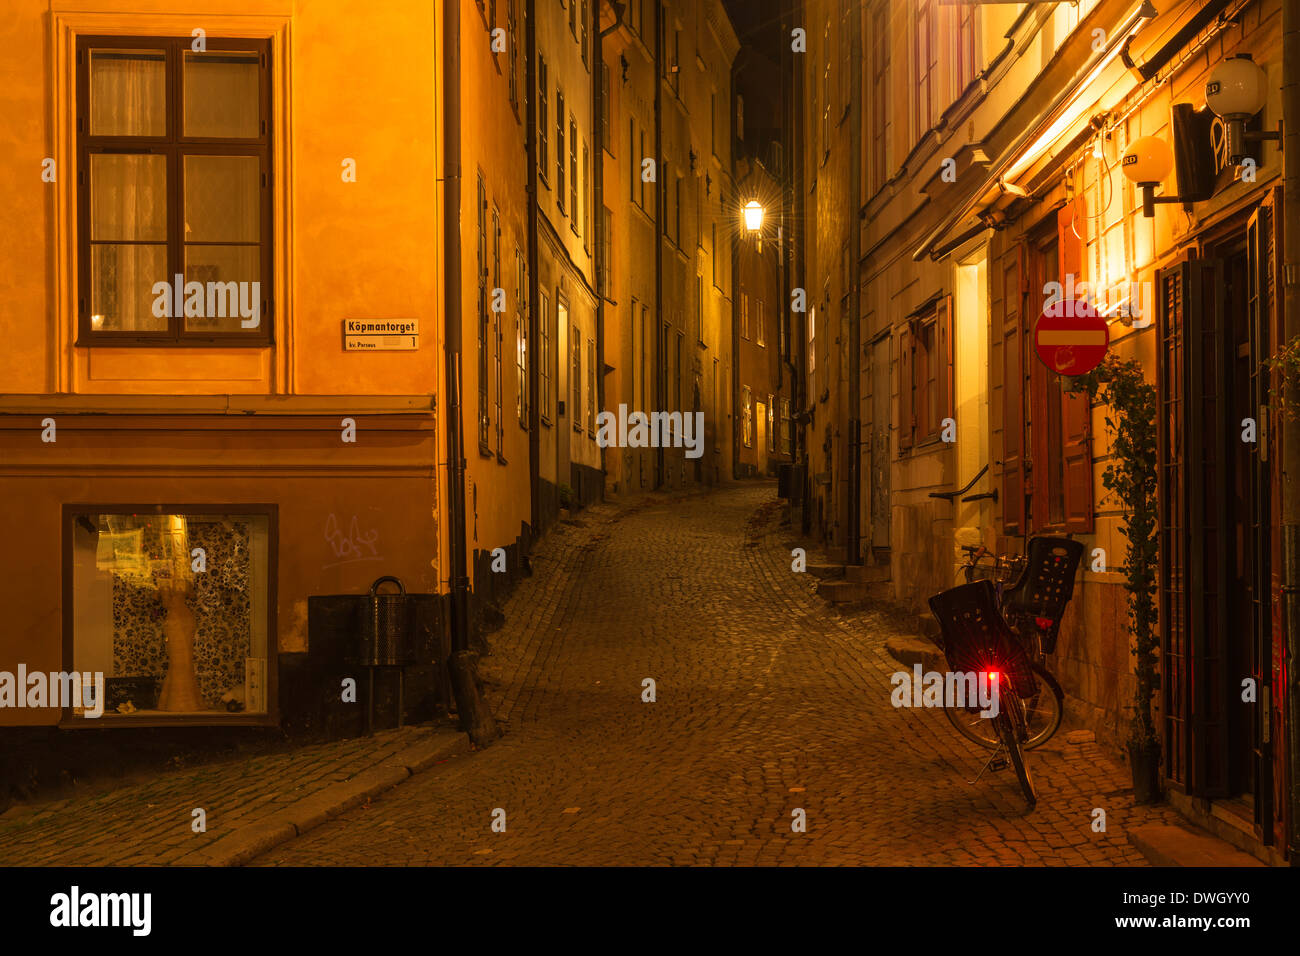 Evening view of Baggensgatan, a narrow cobbled lane in Gamla Stan, the old town of Stockholm, Sweden. Stock Photo